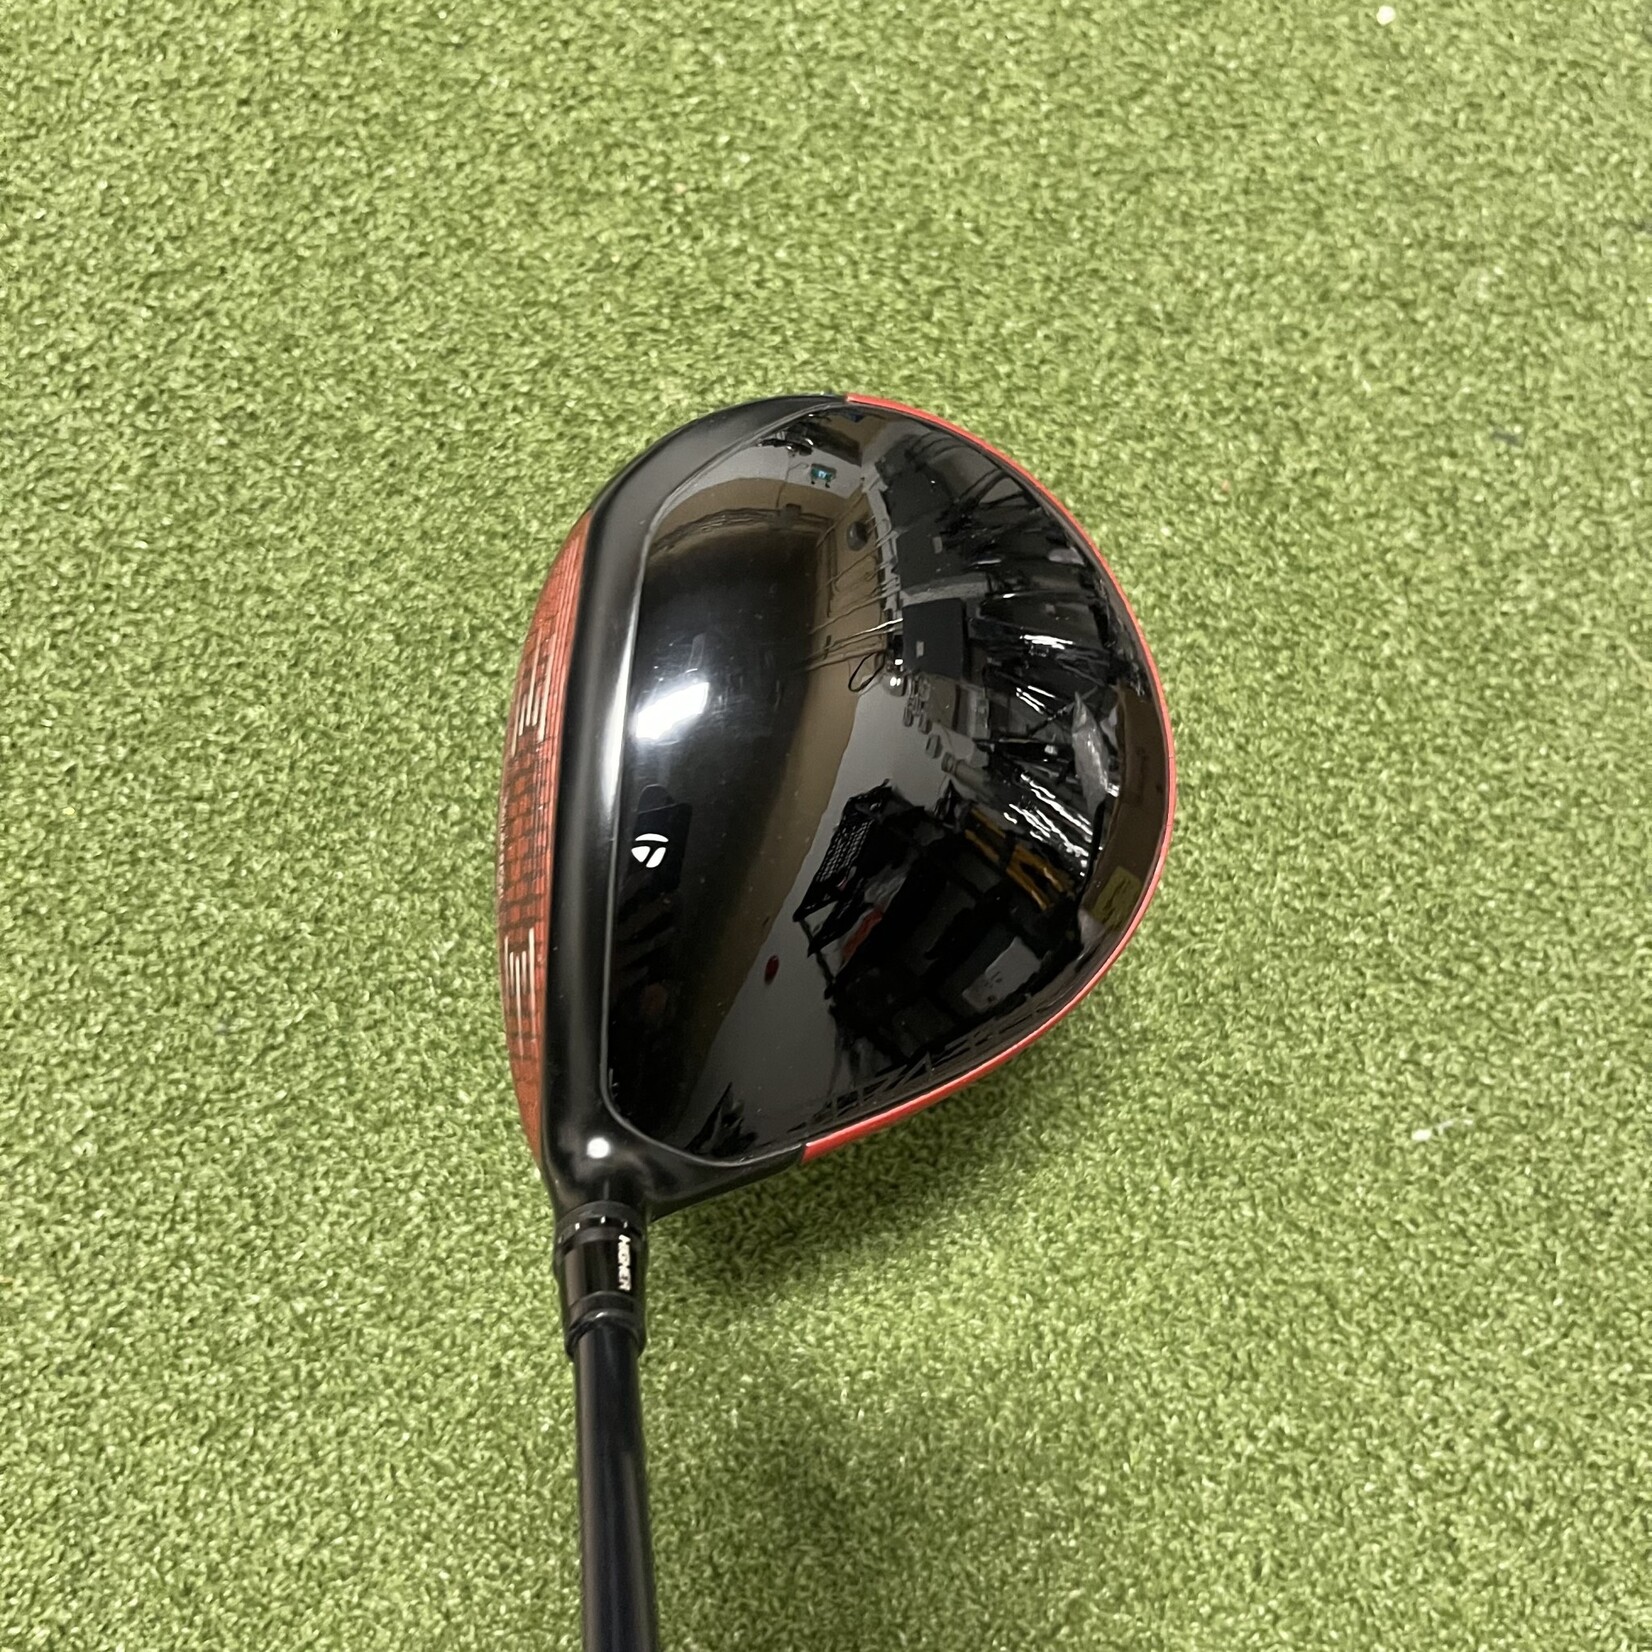 TaylorMade (Pre-owned) Taylormade Stealth 2 10.5* Driver Ventus Blue 6 Stiff Flex (RH)